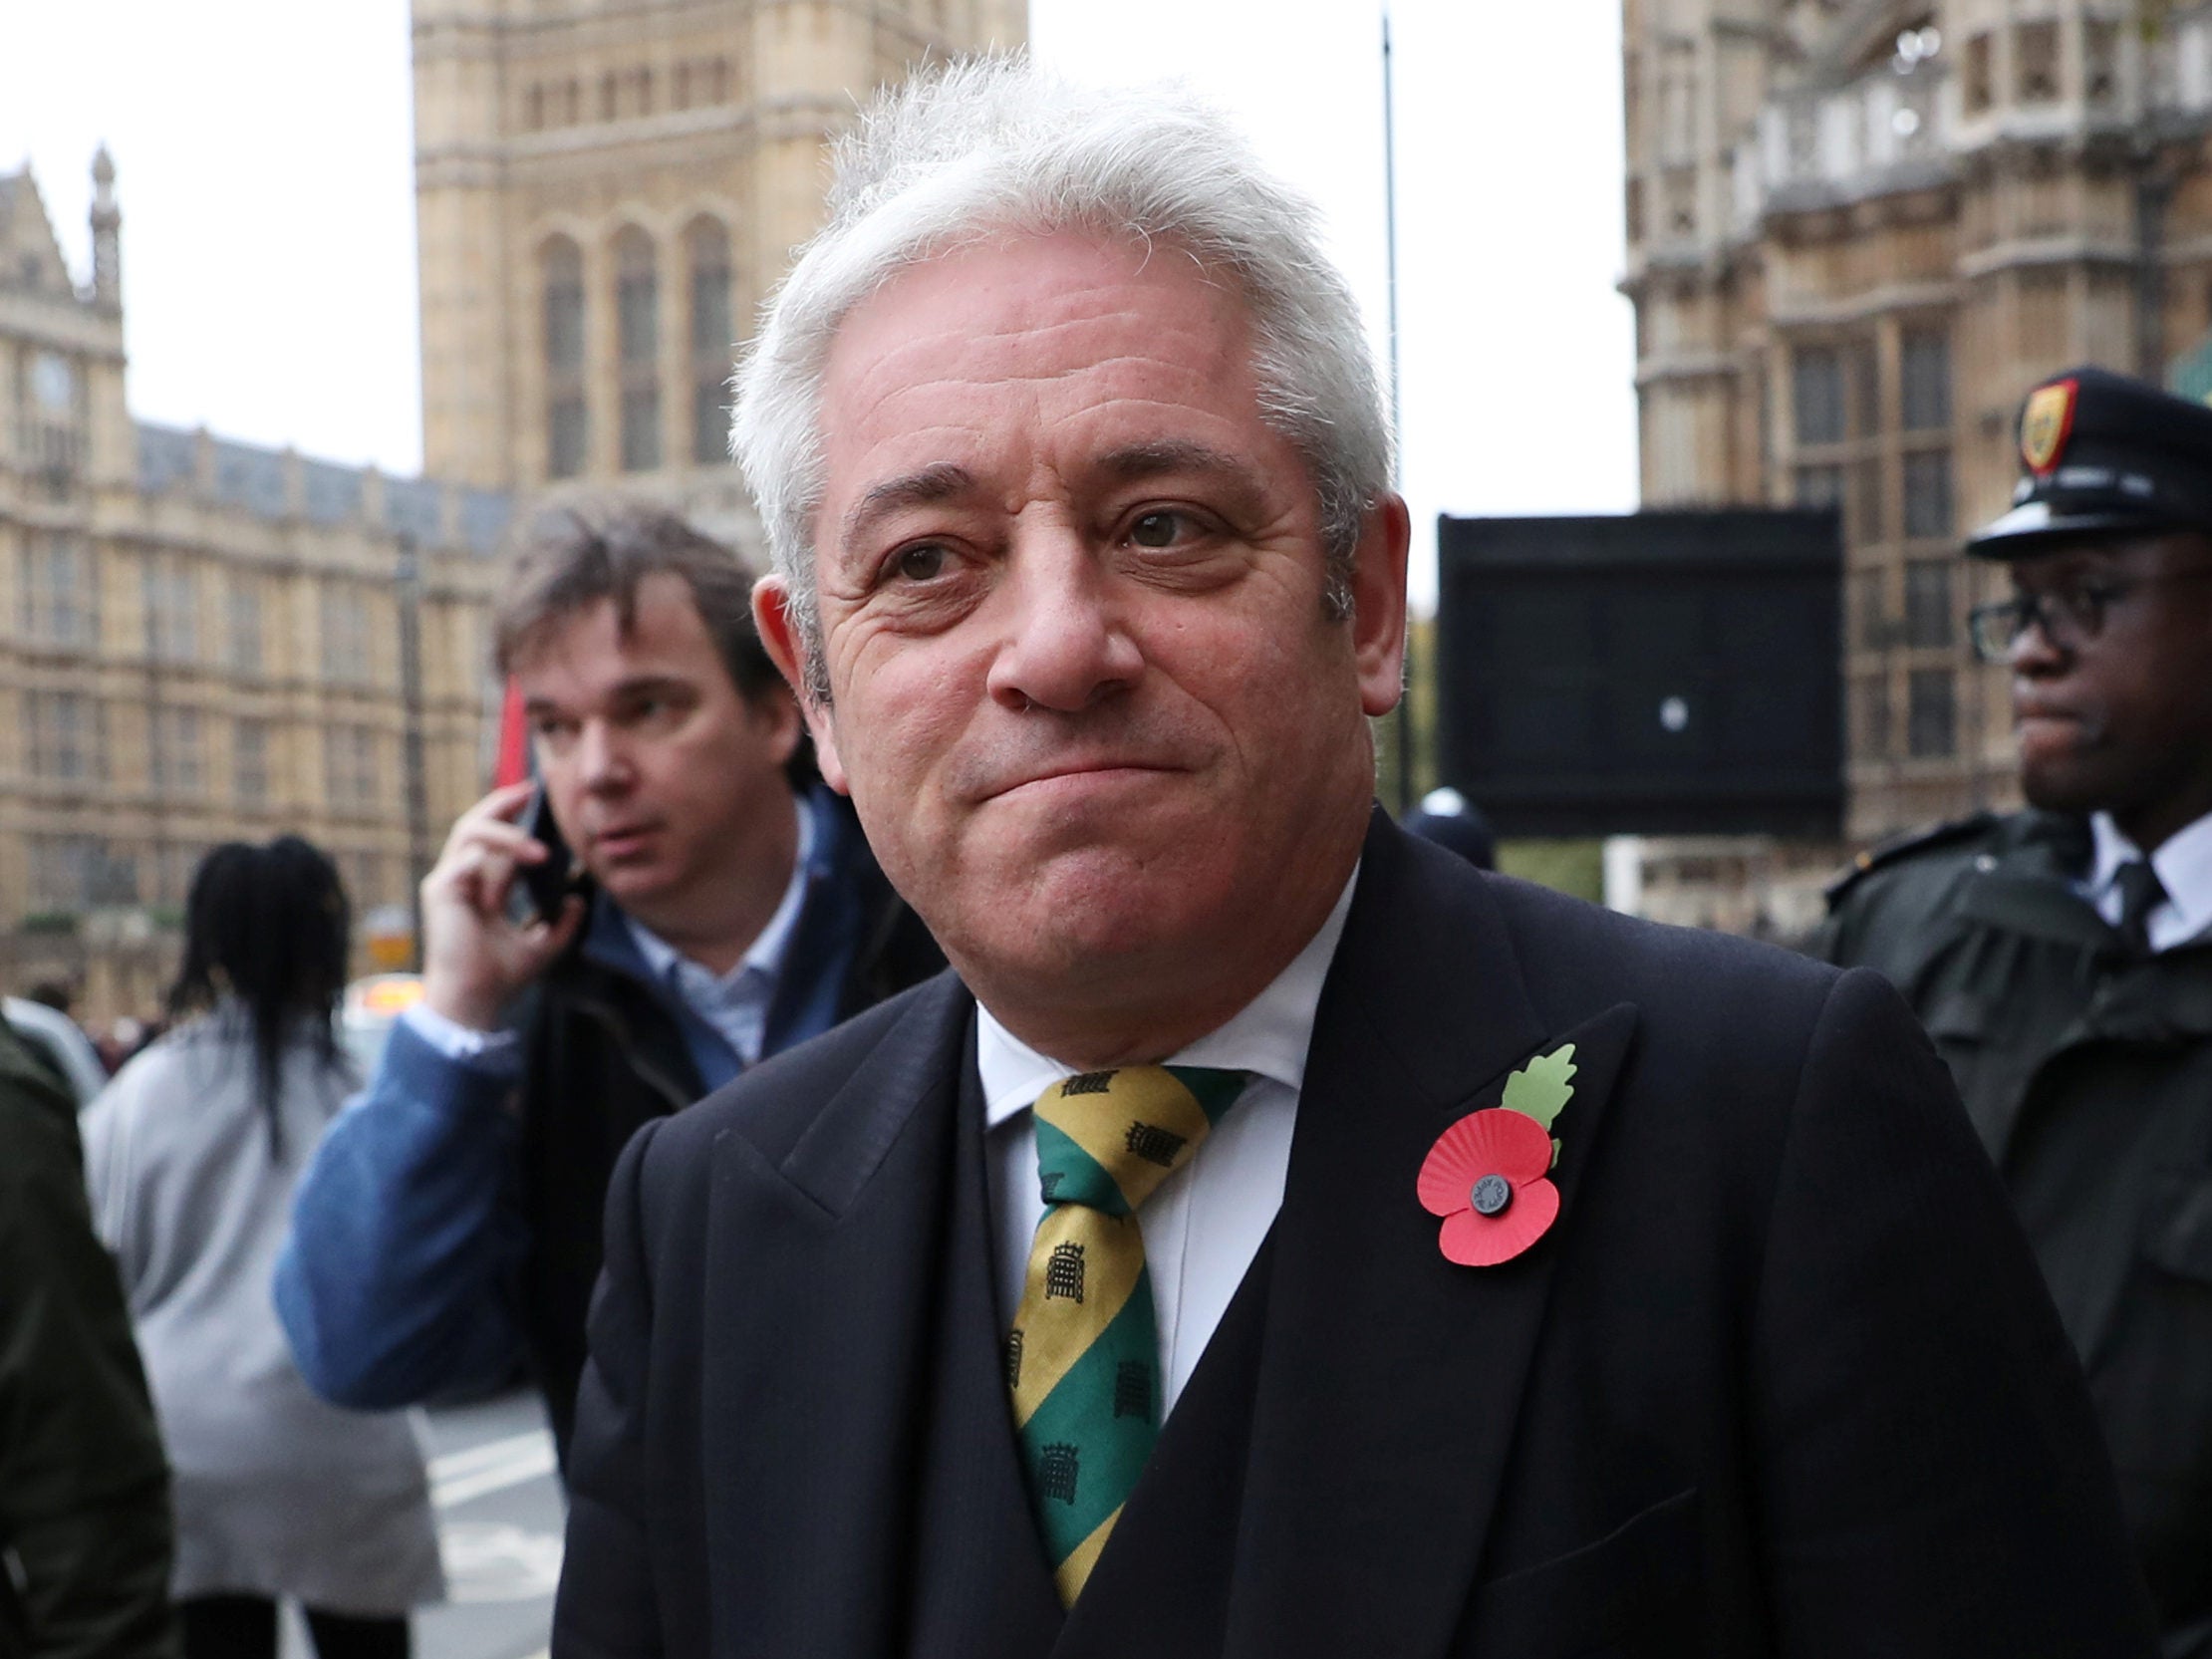 John Bercow invokes parliamentary privilege to block BBC Newsnight's freedom of information query over Keith Vaz bullying claims